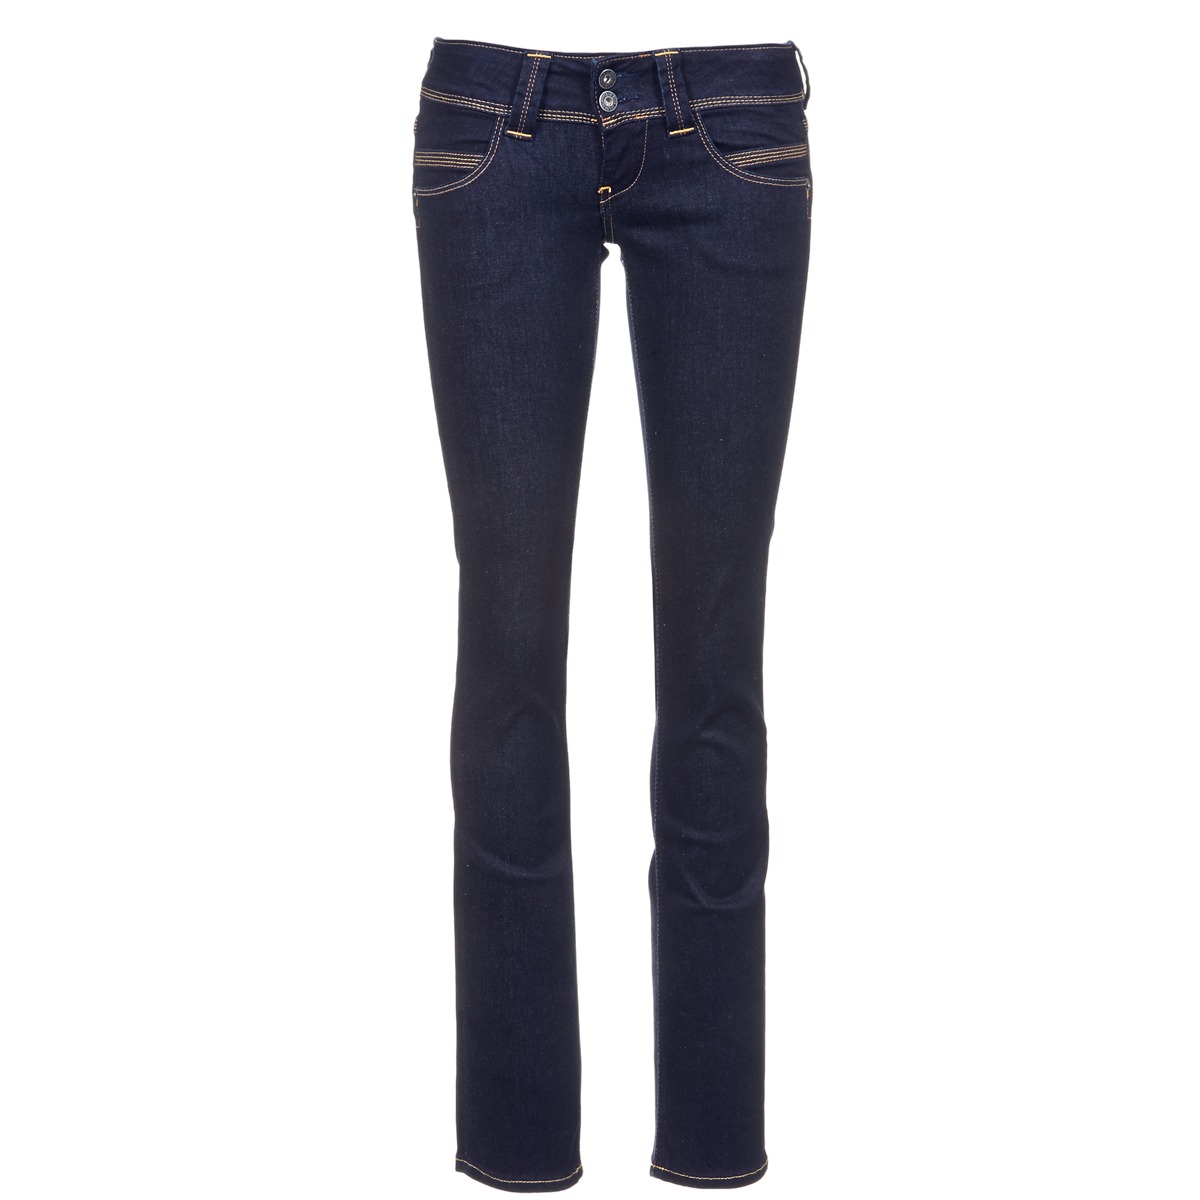 Pepe jeans Blue ! Free - jeans | Clothing Women Spartoo - straight / NET delivery M15 VENUS